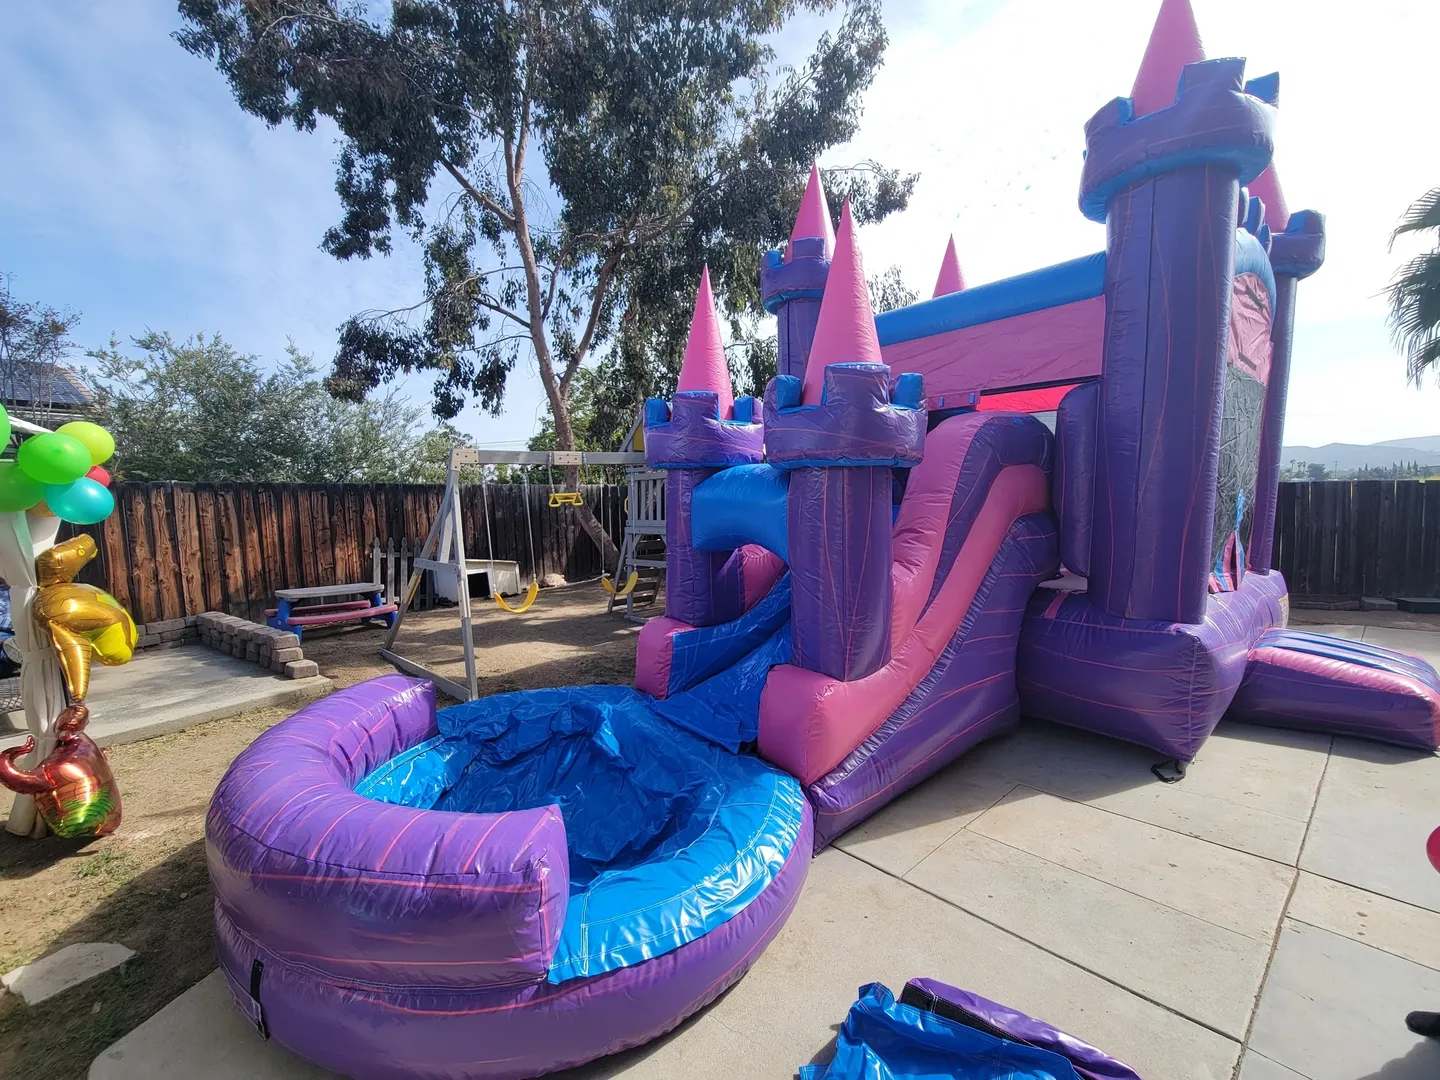 A purple and blue inflatable castle with water slide.